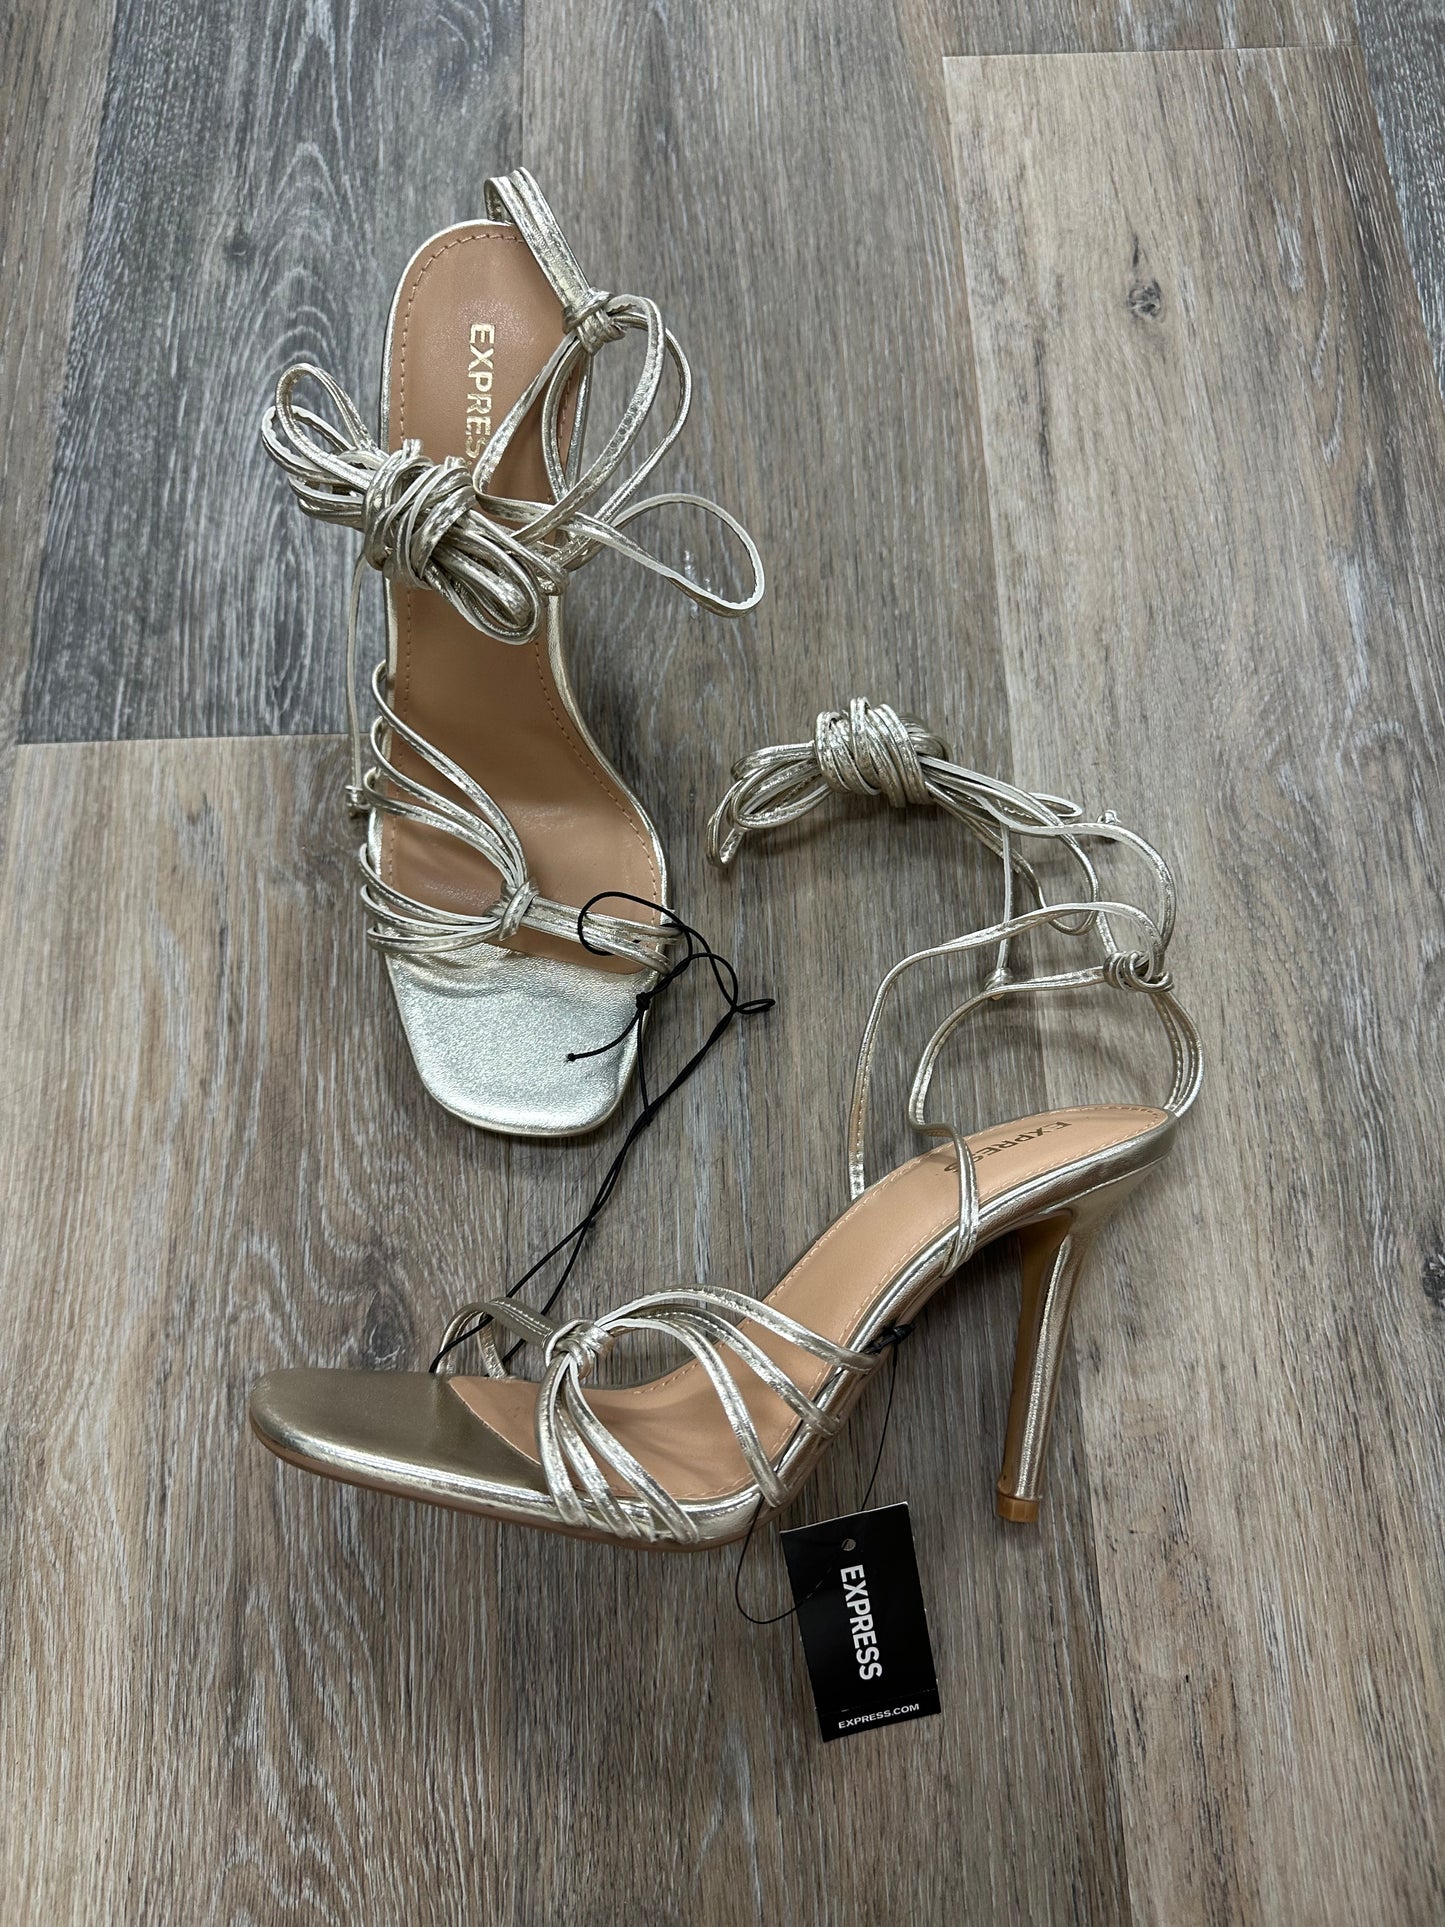 Shoes Heels Stiletto By Express  Size: 8